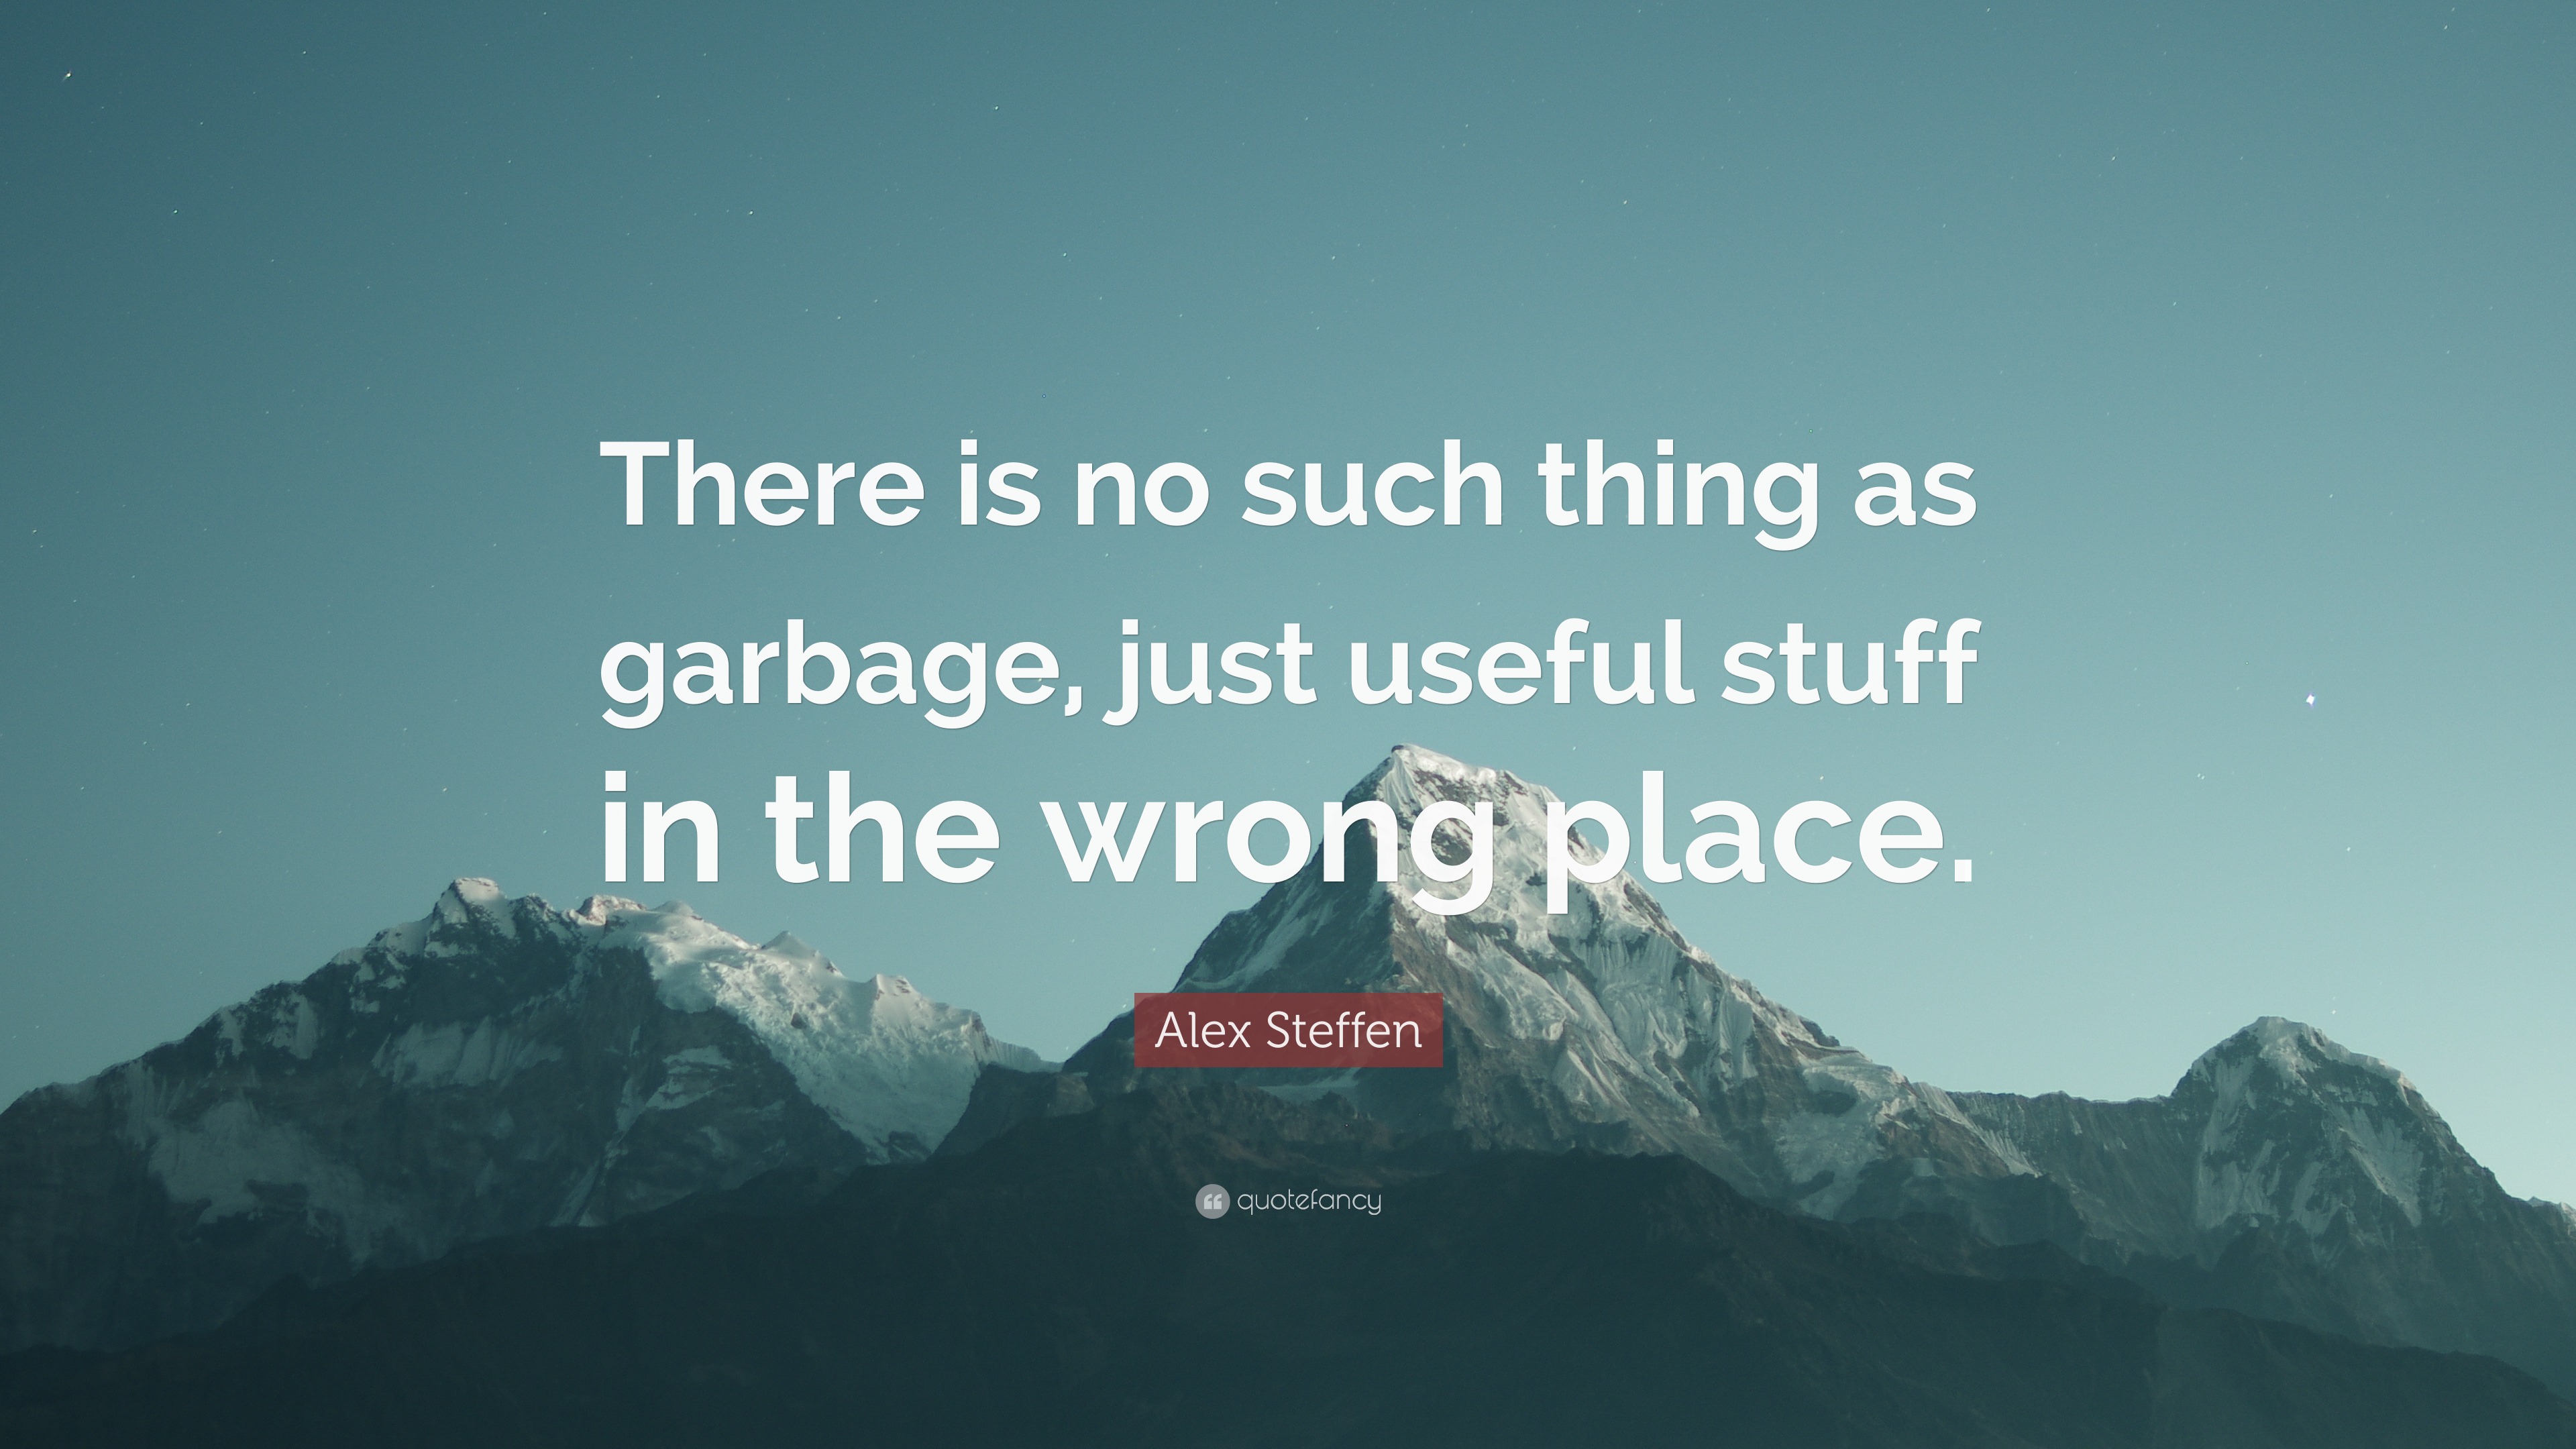 https://quotefancy.com/media/wallpaper/3840x2160/3382631-Alex-Steffen-Quote-There-is-no-such-thing-as-garbage-just-useful.jpg